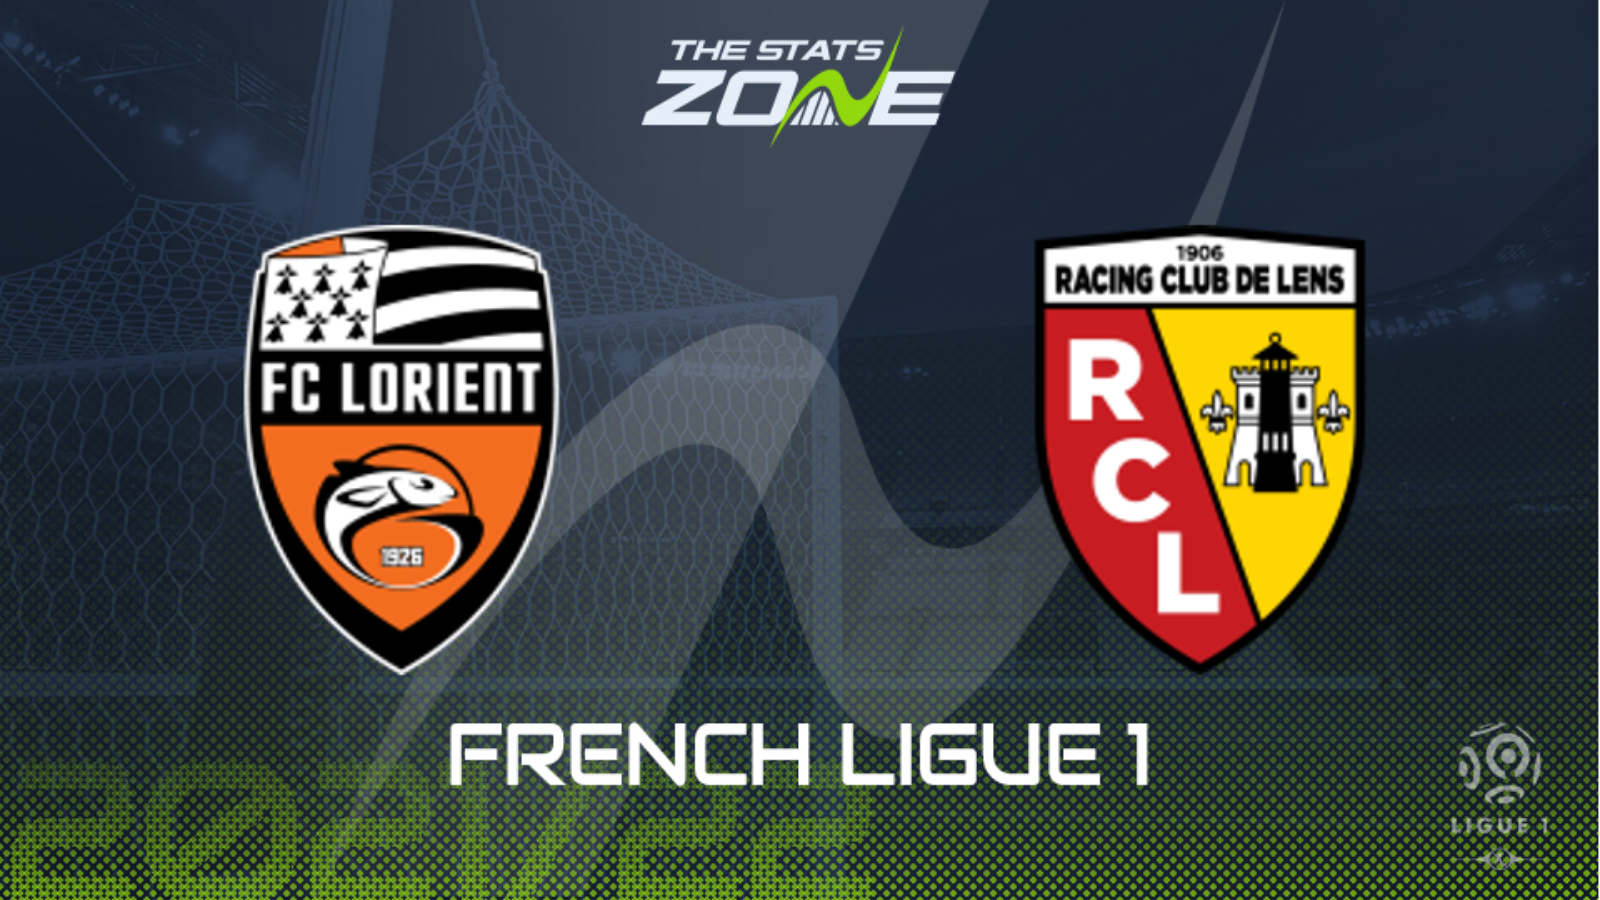 Lorient vs Lens Preview & Prediction - The Stats Zone